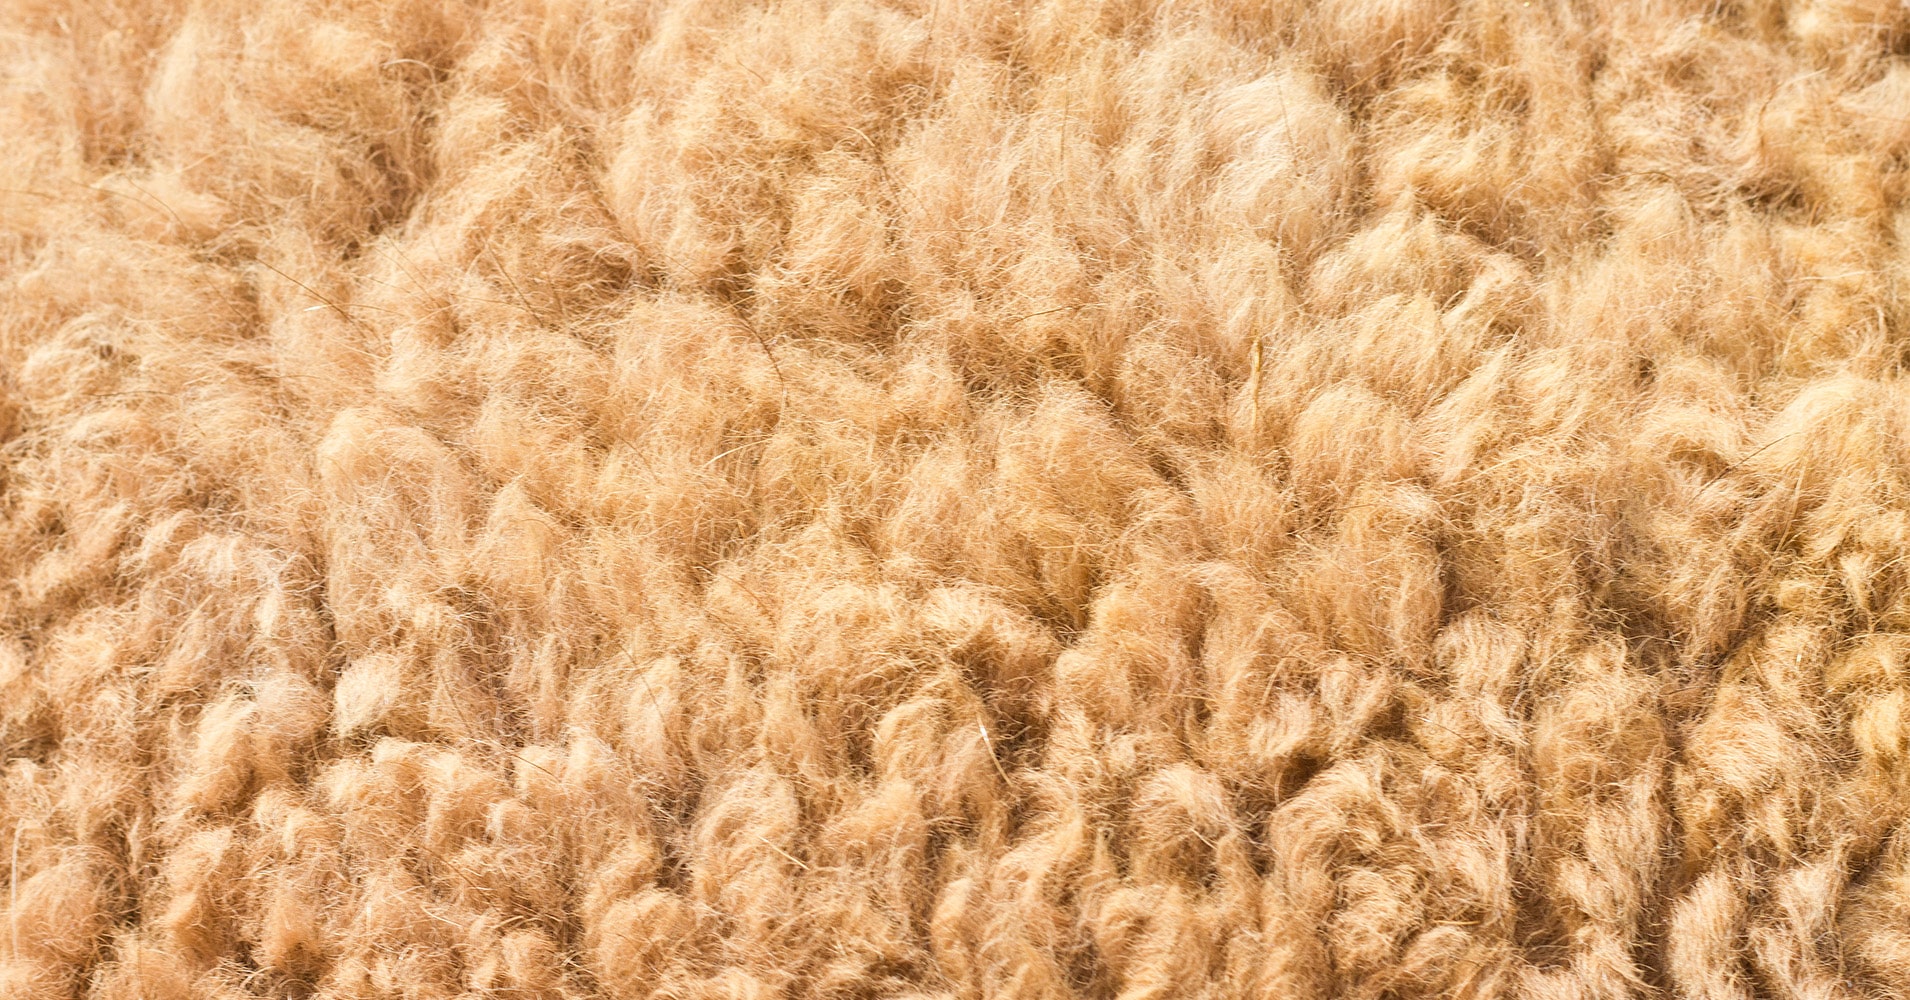 Luxury fibres explained - Camel hair - Blugiallo - Tailoring reinvented